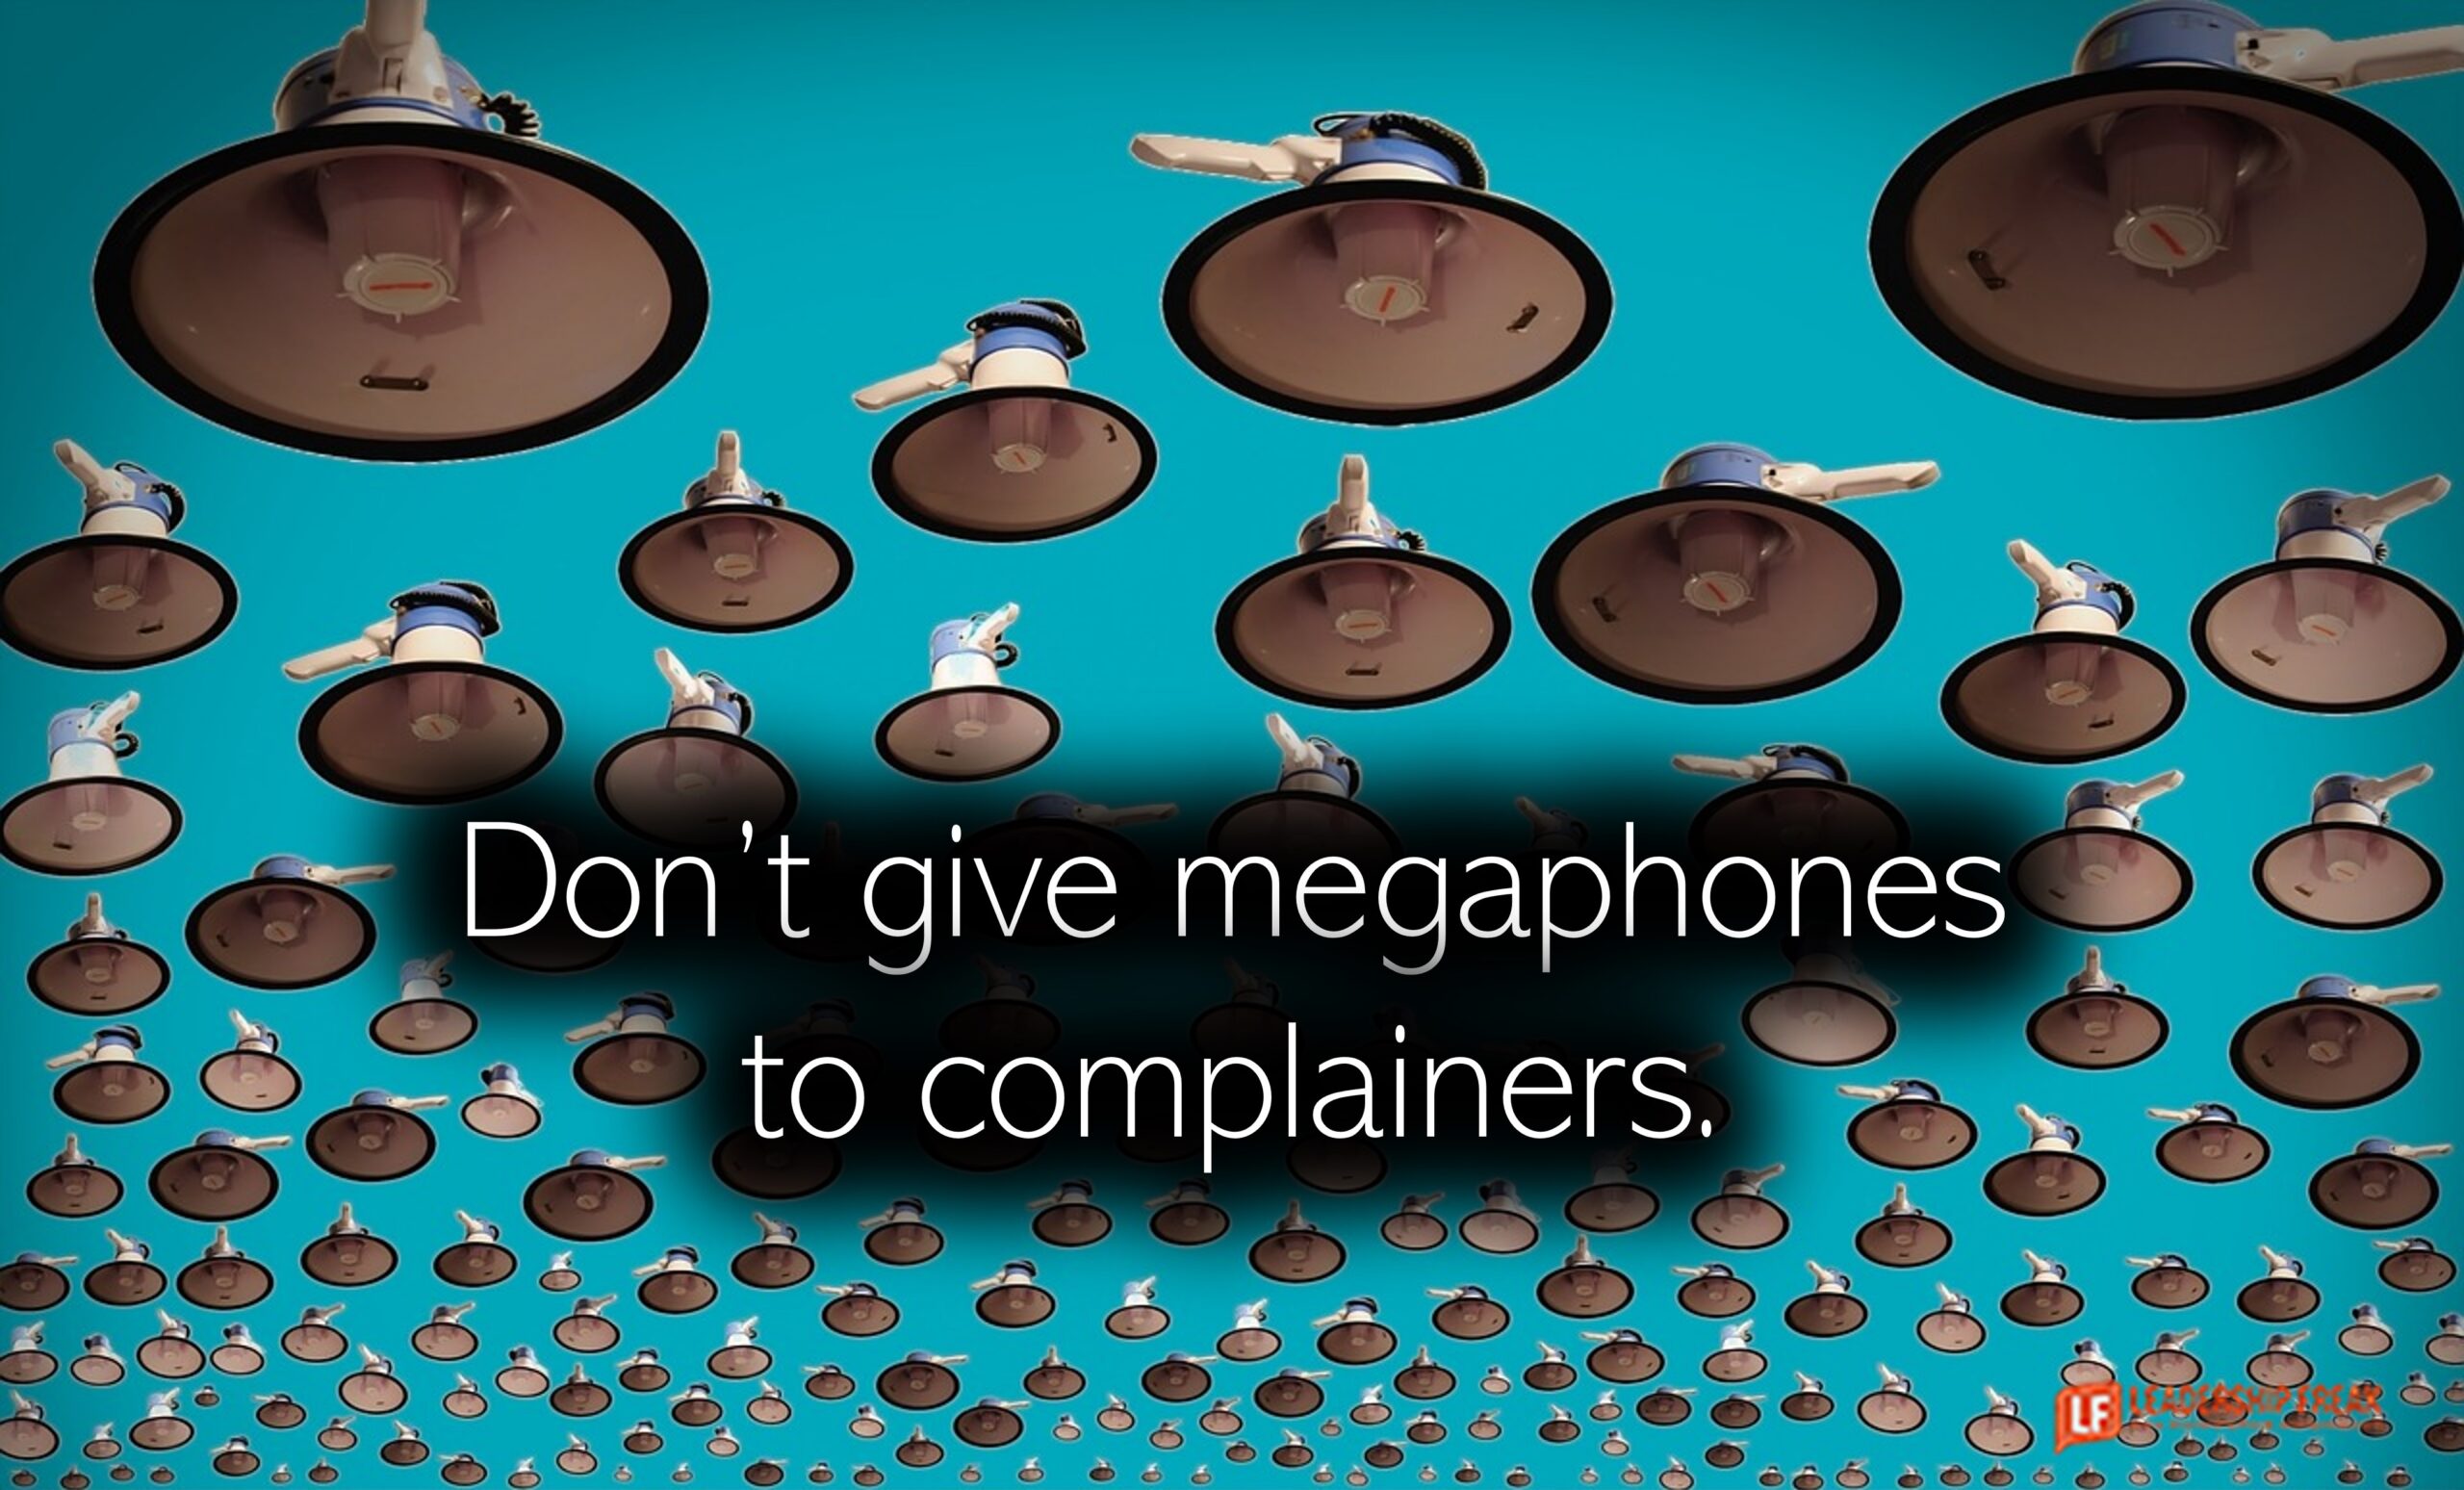 Don't give megaphones to complainers